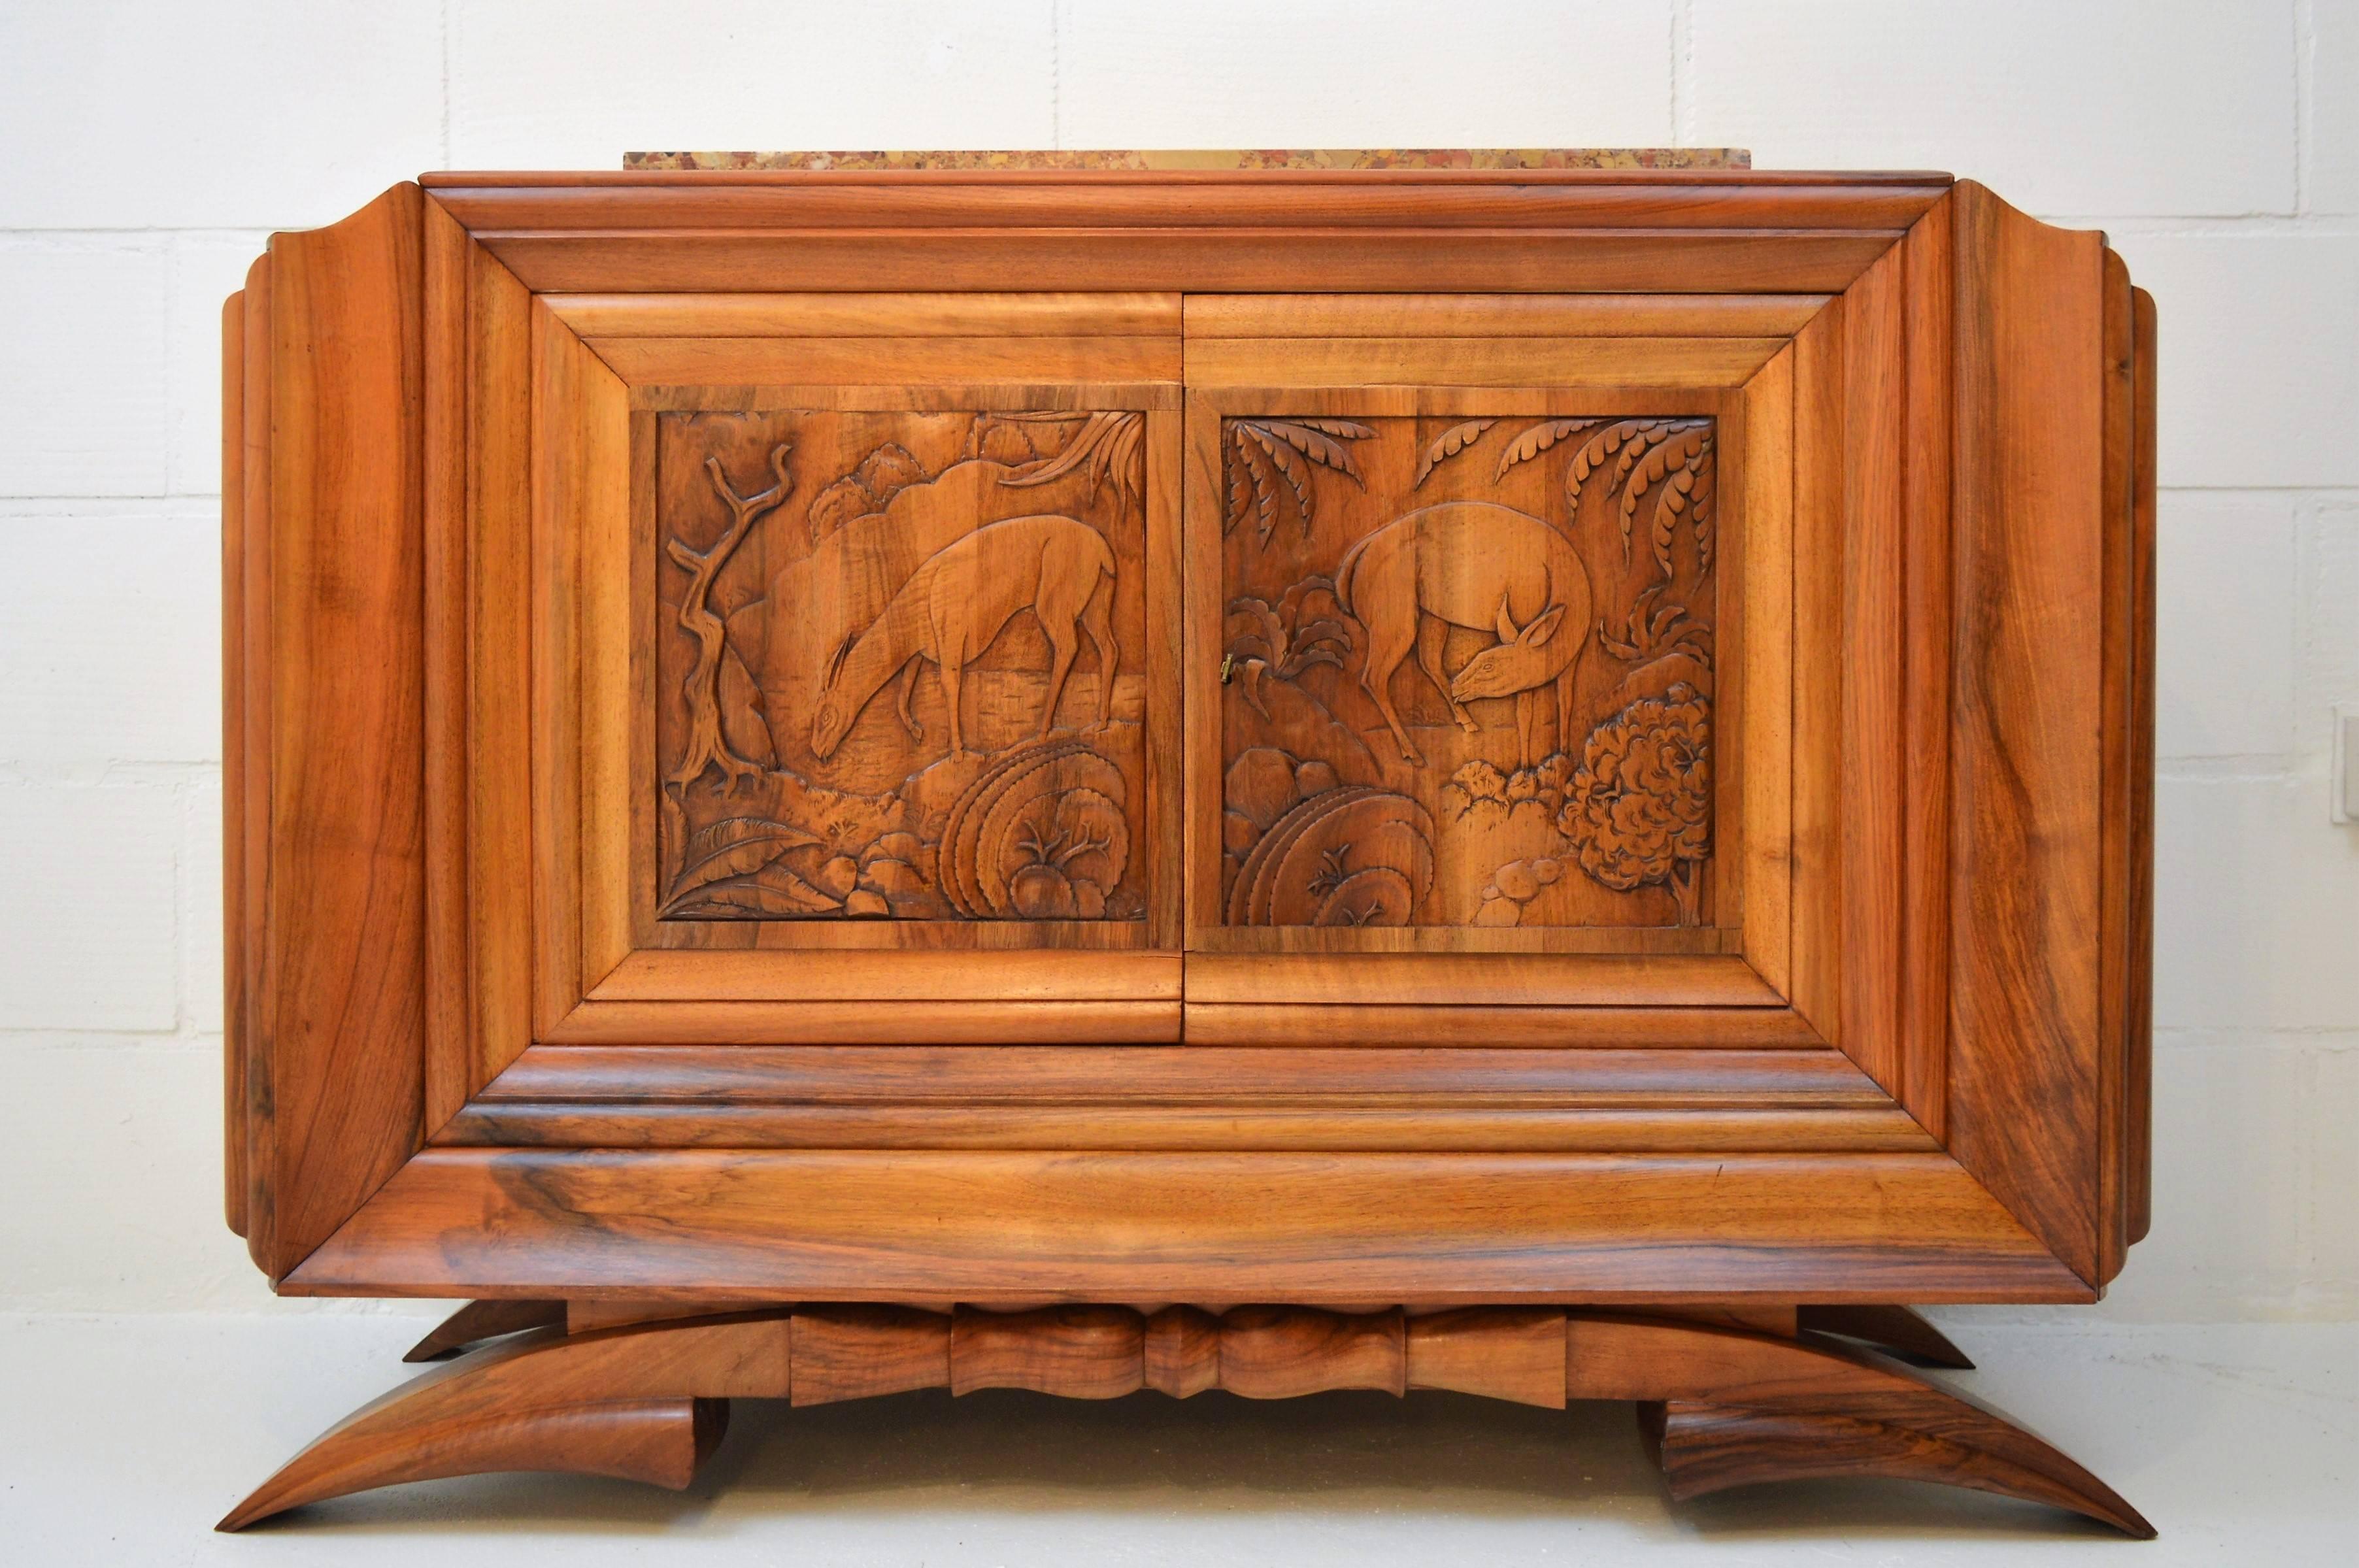 Impressive and unusual small sideboard in beautiful French walnut with sculpted doors by Dominique, Paris 1931. This sideboard is made in the style that in France is called Áfricanisme, and was very popular by several artists in the early 1930s.